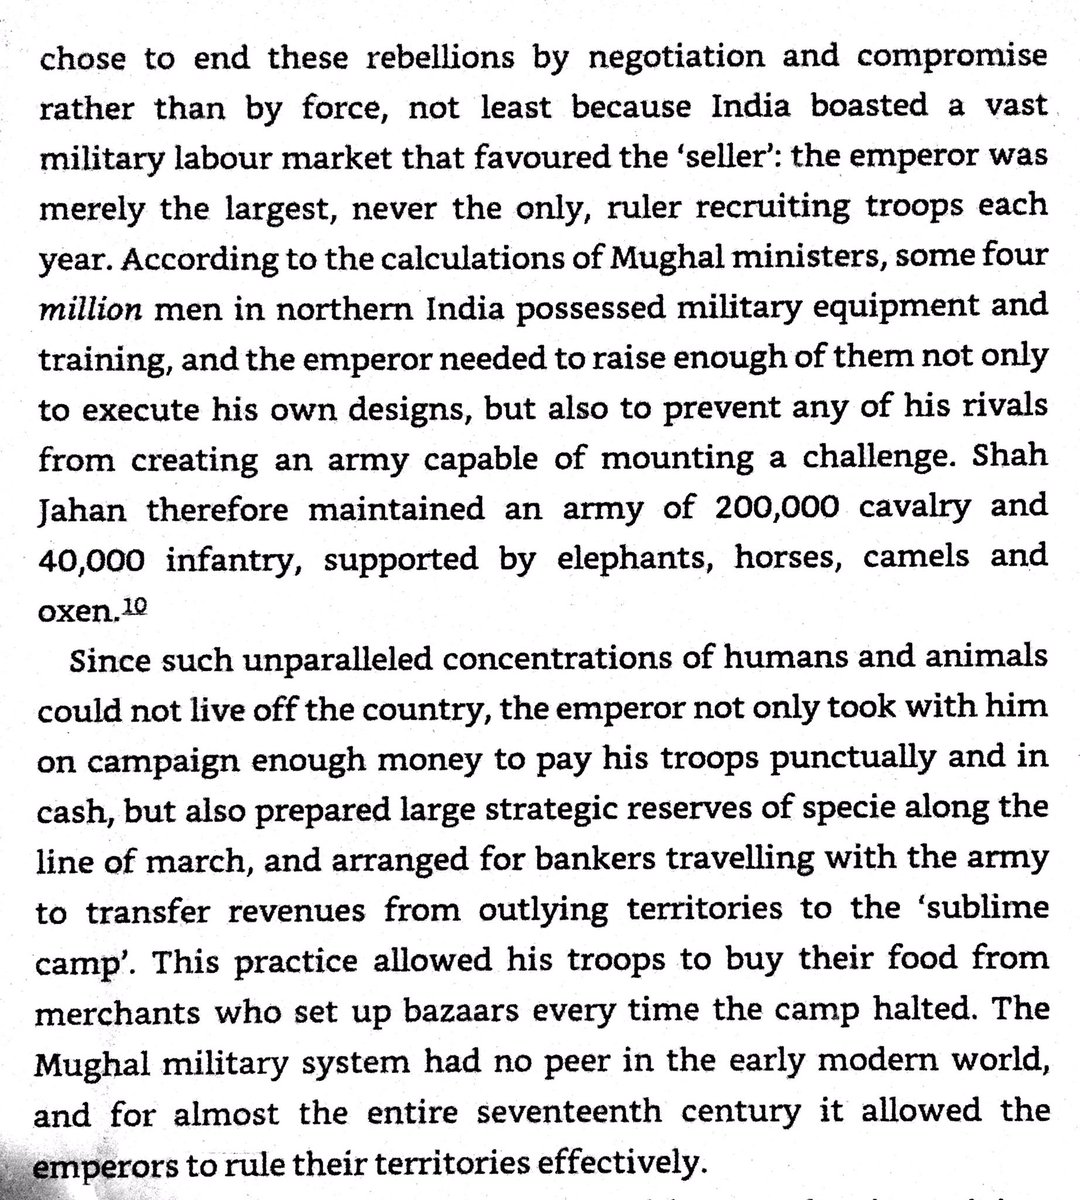 4 million men in northern India possessed weapons & military training during mid-17th century. Mughals organized bankers & markets in their empire to ensure their army of 240k was regularly paid & fed.